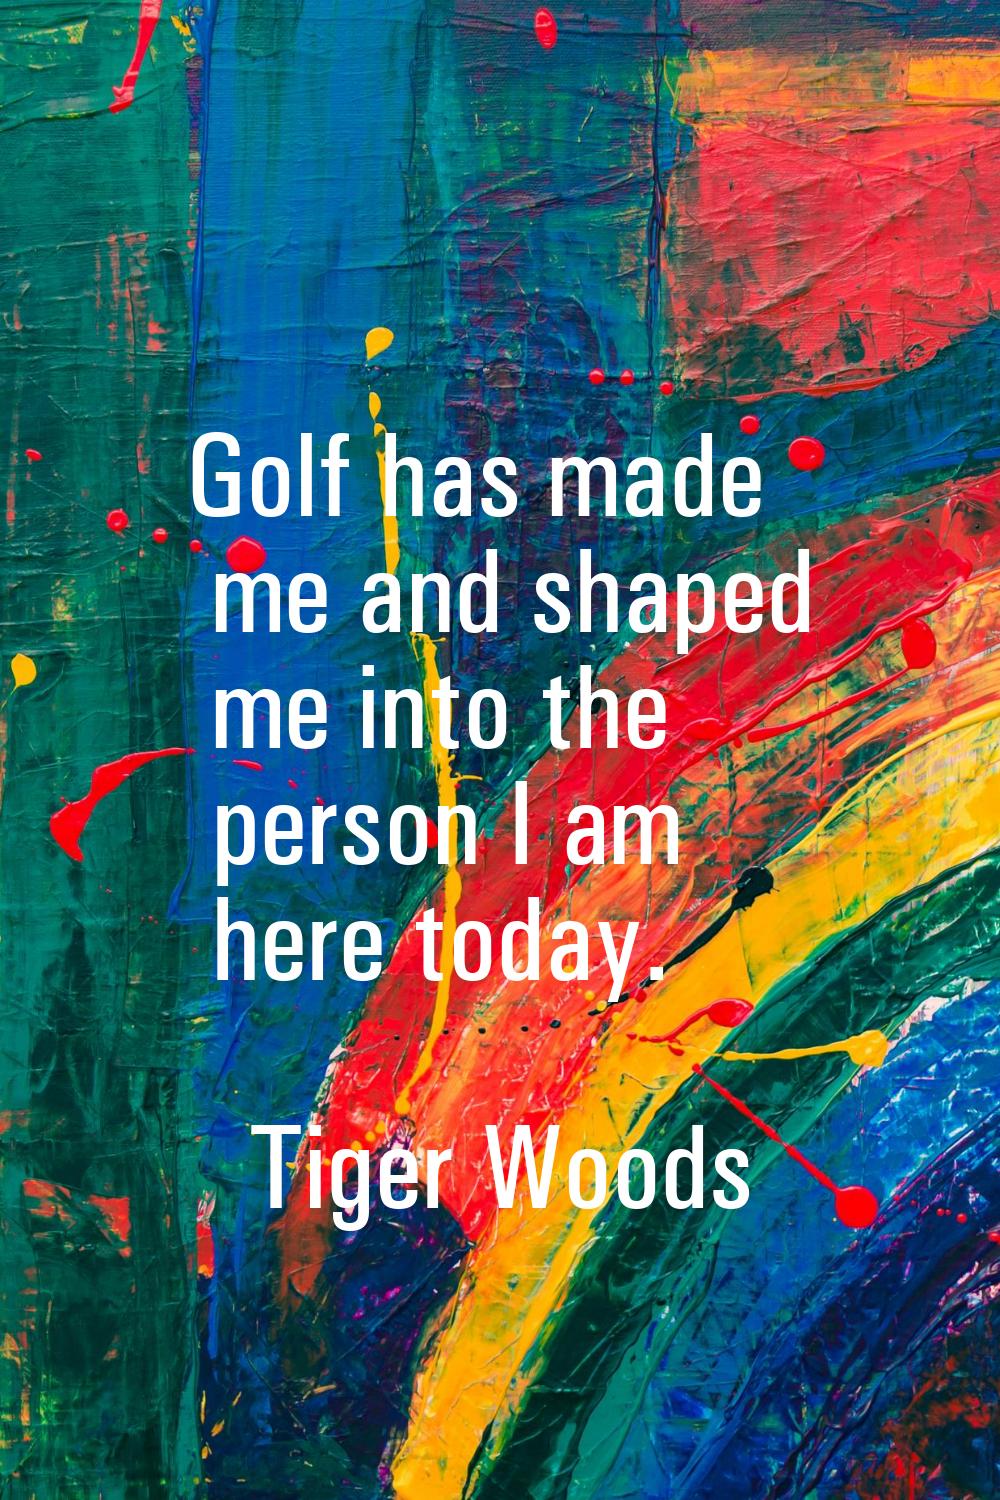 Golf has made me and shaped me into the person I am here today.